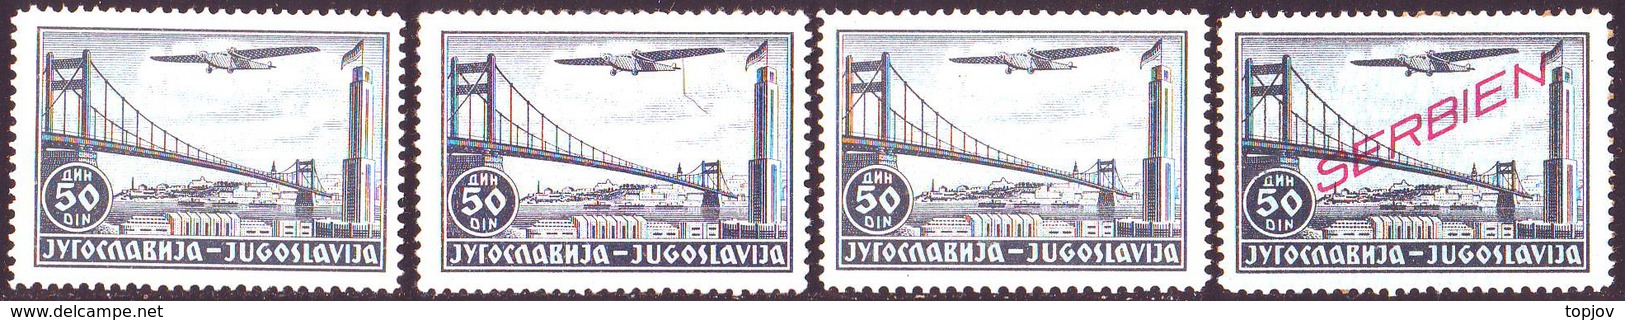 WW II SERBIA - GERMANY - 1941. AIR- Mi#25A+25AN+25CN.  .- MNH ** - RARE - GEPRUF VELICKOVIC - Airmail